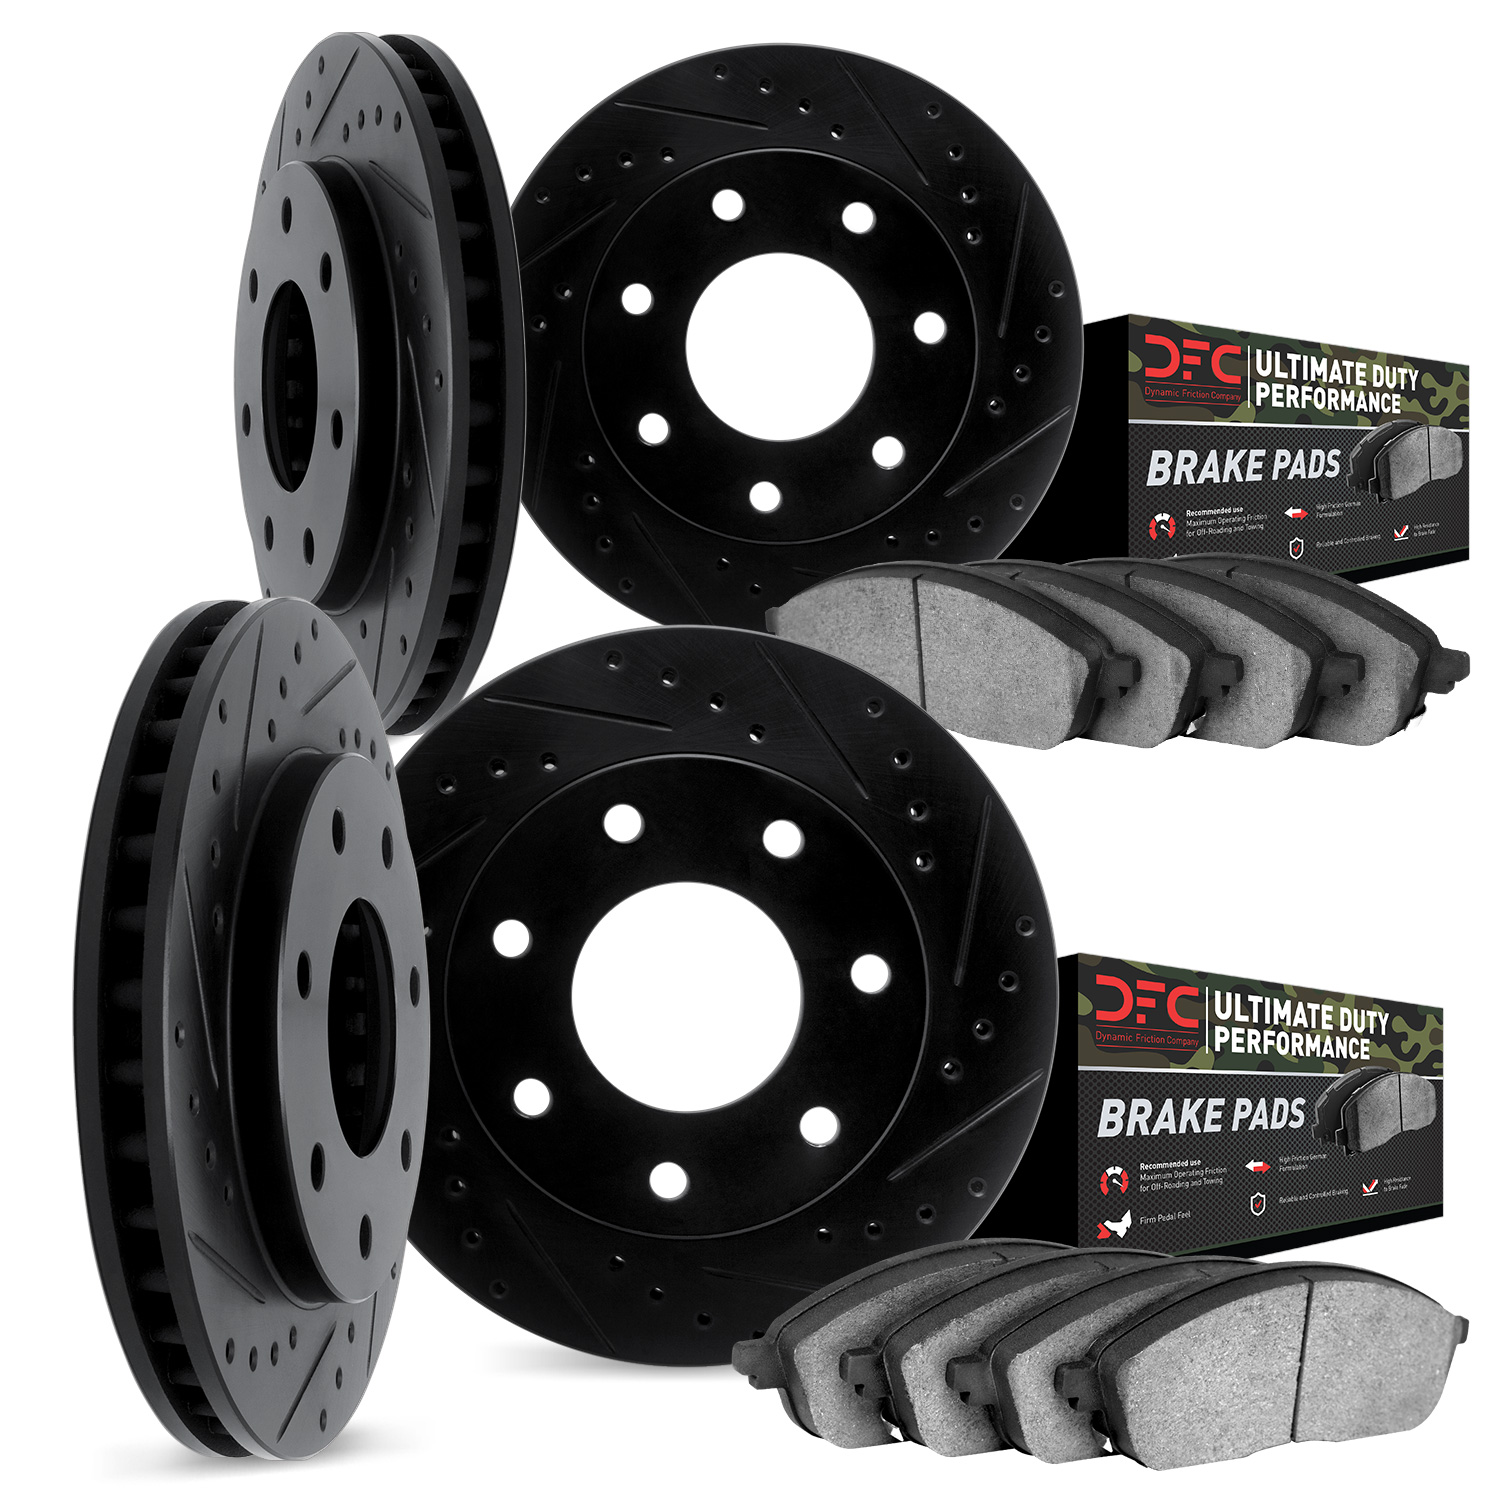 8404-54036 Drilled/Slotted Brake Rotors with Ultimate-Duty Brake Pads Kit [Black], 2009-2009 Ford/Lincoln/Mercury/Mazda, Positio